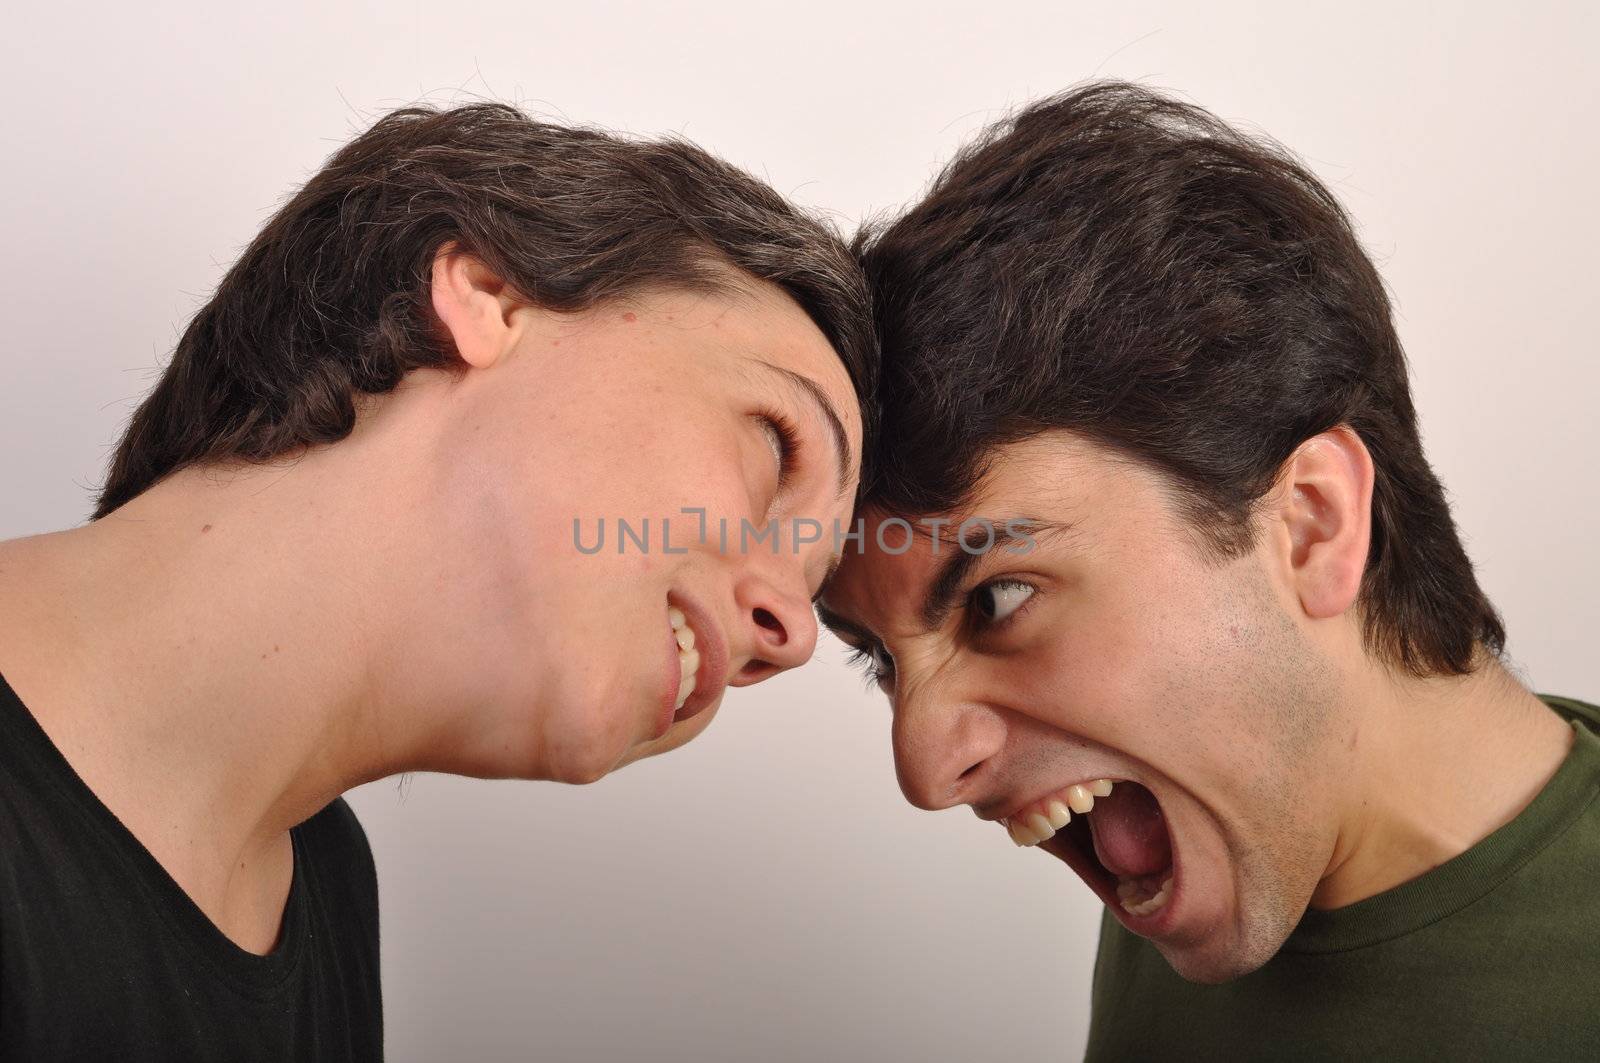 portrait of a woman and man yelling at each other